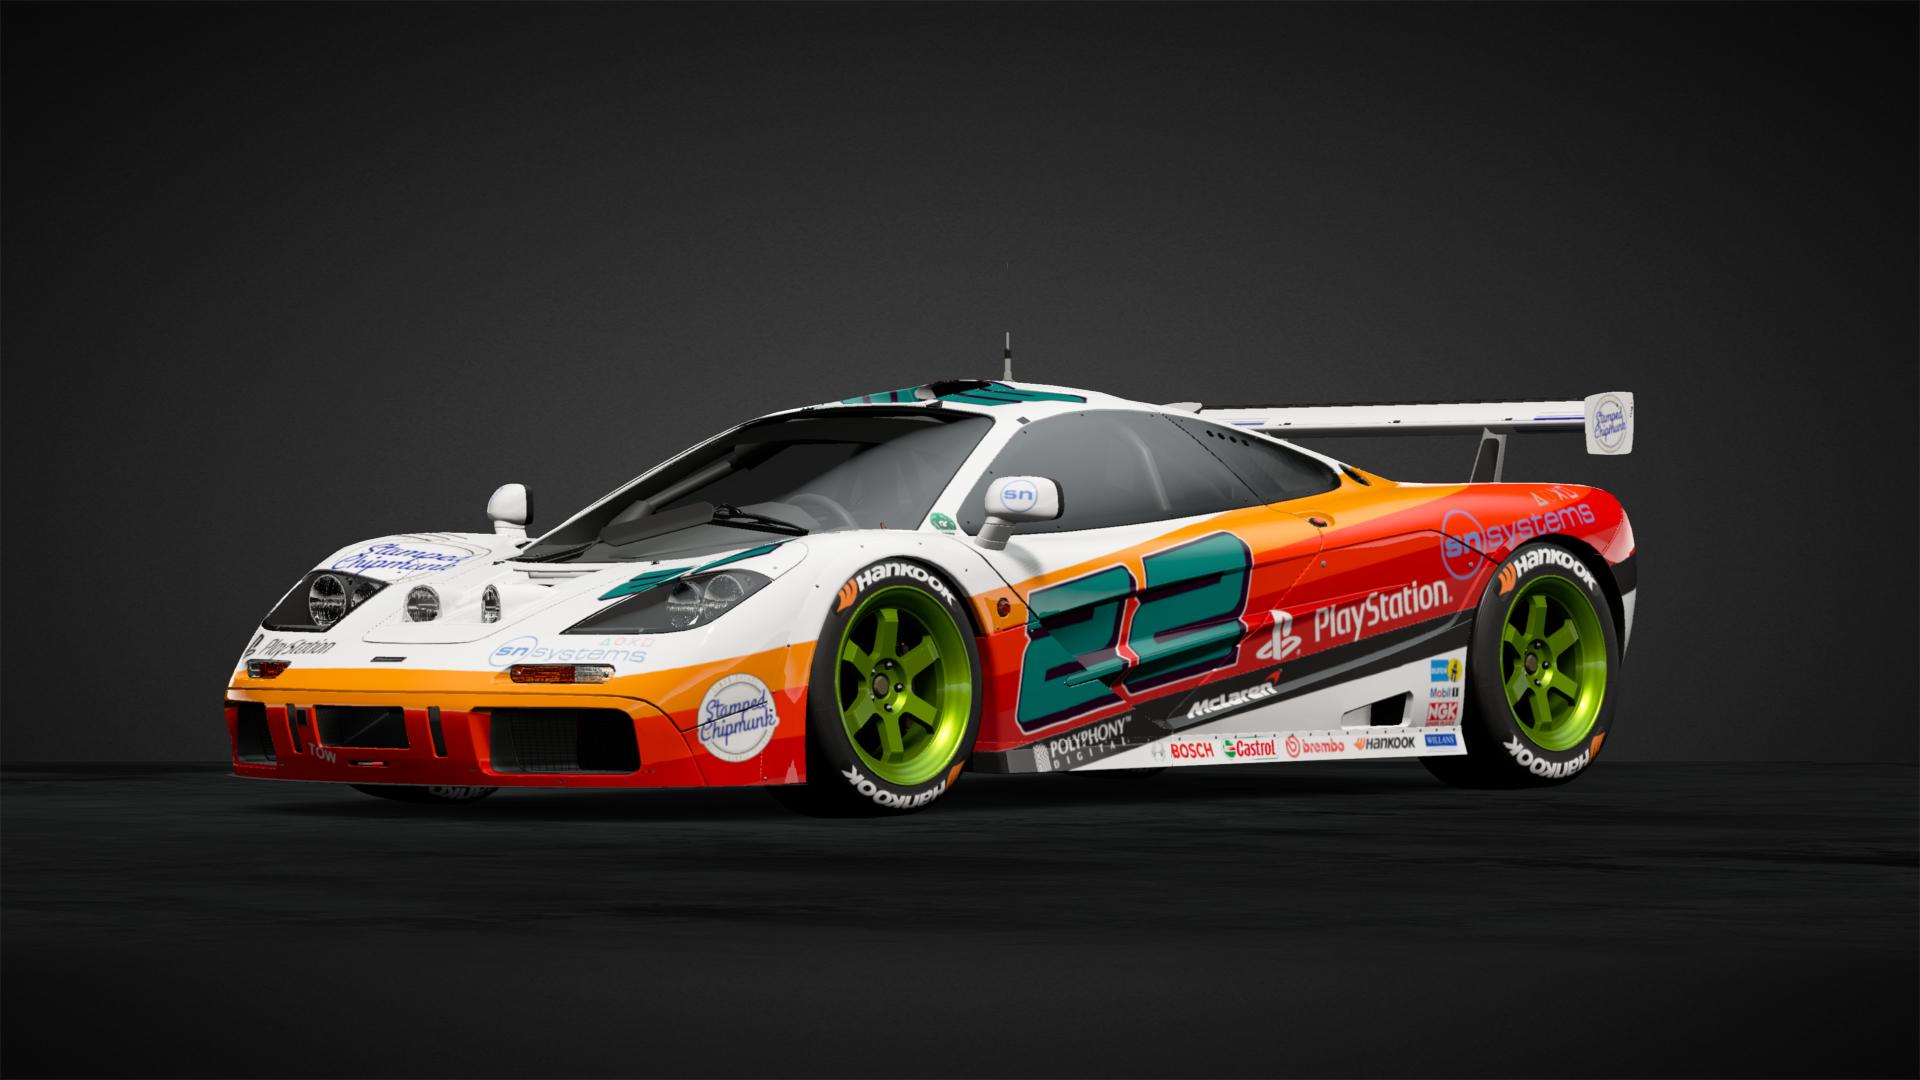 McLaren F1 GT - fictitious personal livery